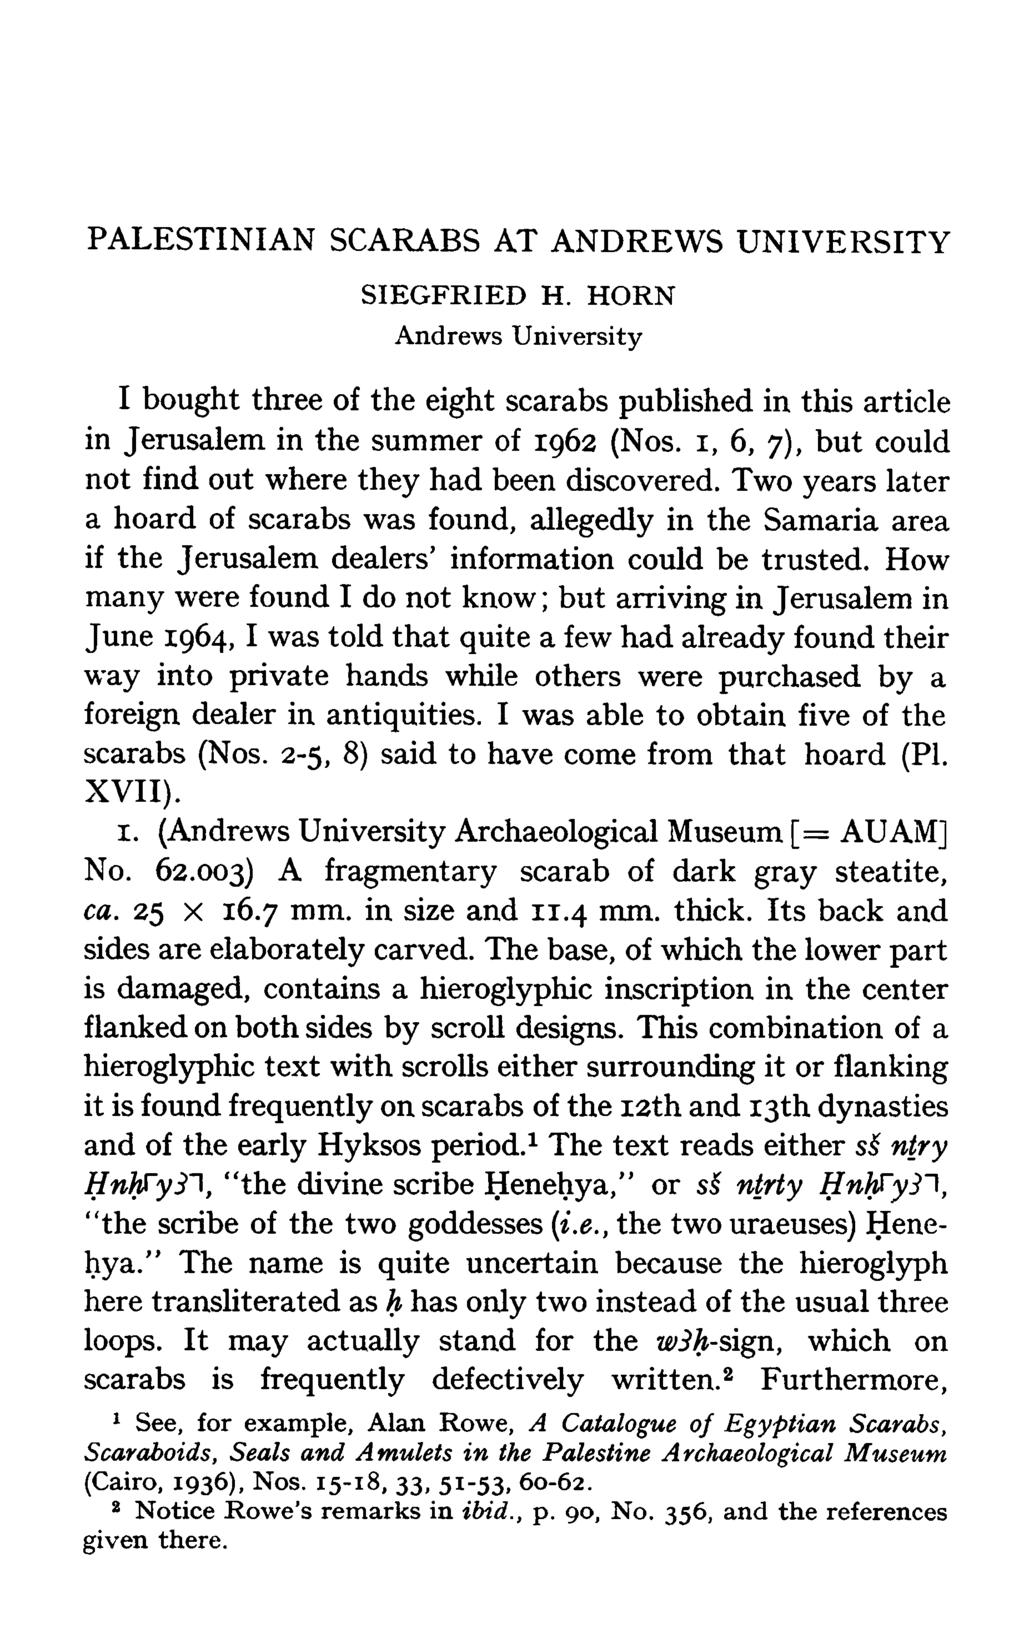 PALESTINIAN SCARABS AT ANDREWS UNIVERSITY SIEGFRIED H. HORN Andrews University I bought three of the eight scarabs published in this article in Jerusalem in the summer of 1962 (Nos.